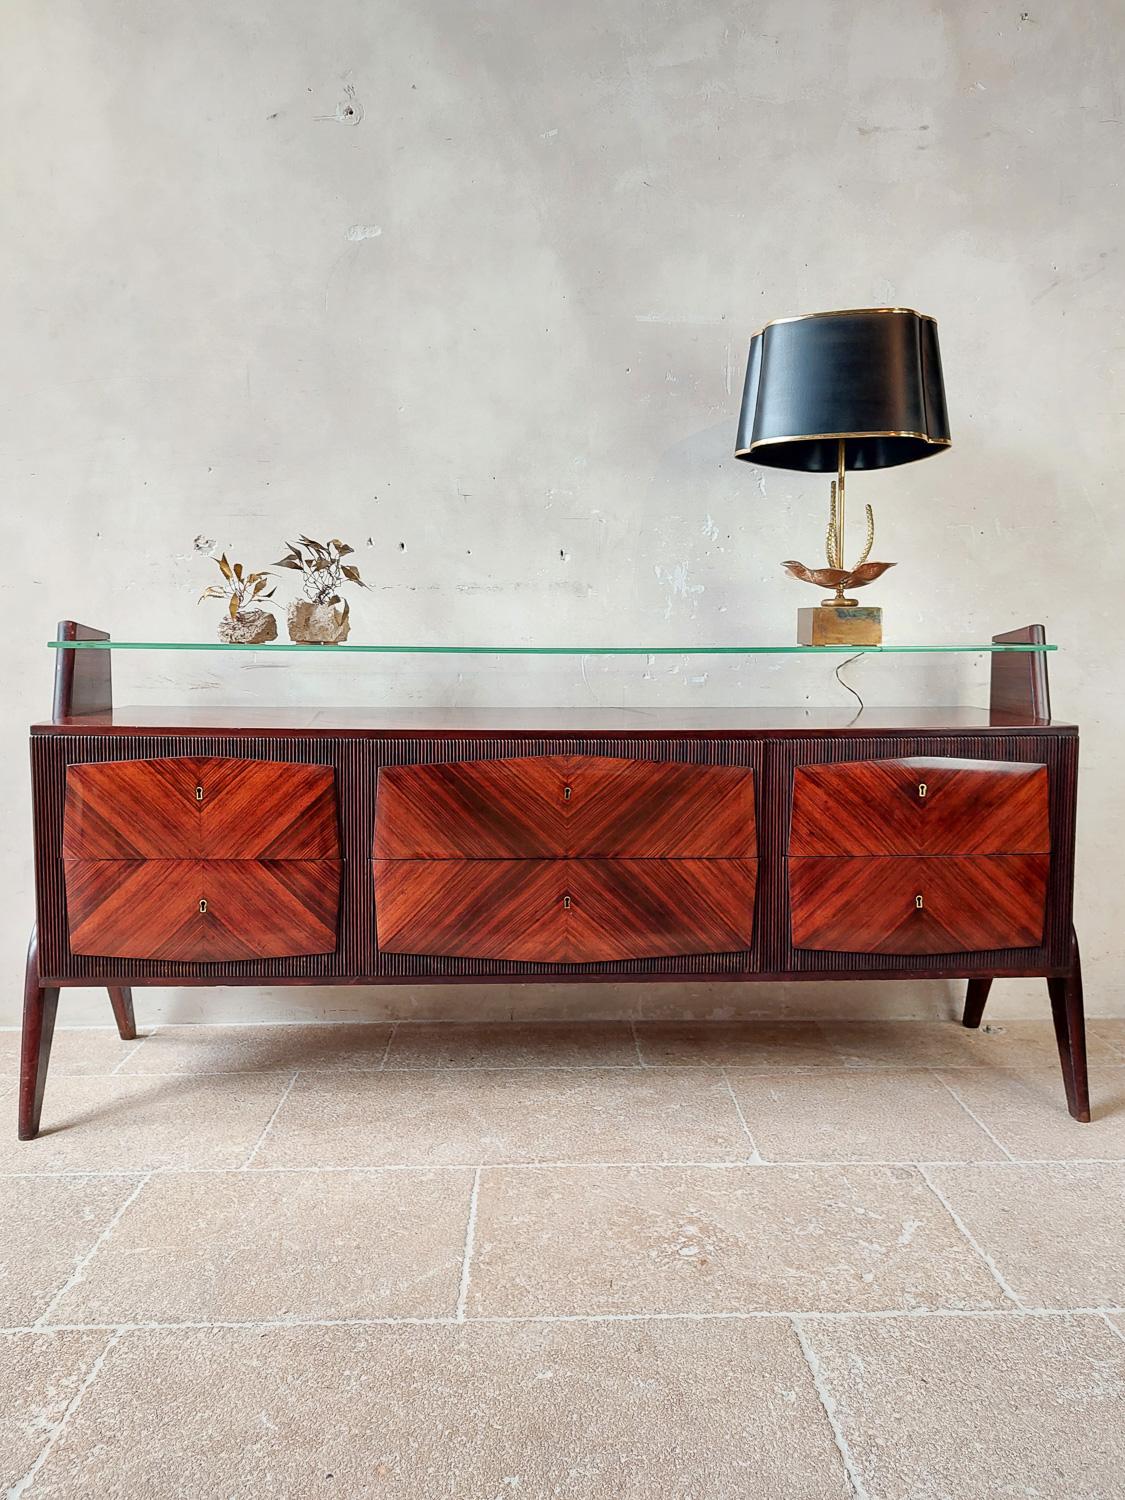 Sideboard by Osvaldo Borsani, Italy, 1950s. Beautiful design with ribbed laquered body and mahogany veneer on the sides, drawers and top in beautiful V pattern. With glass plate on top.

Borsani studied art and architecture in Milan. He became known